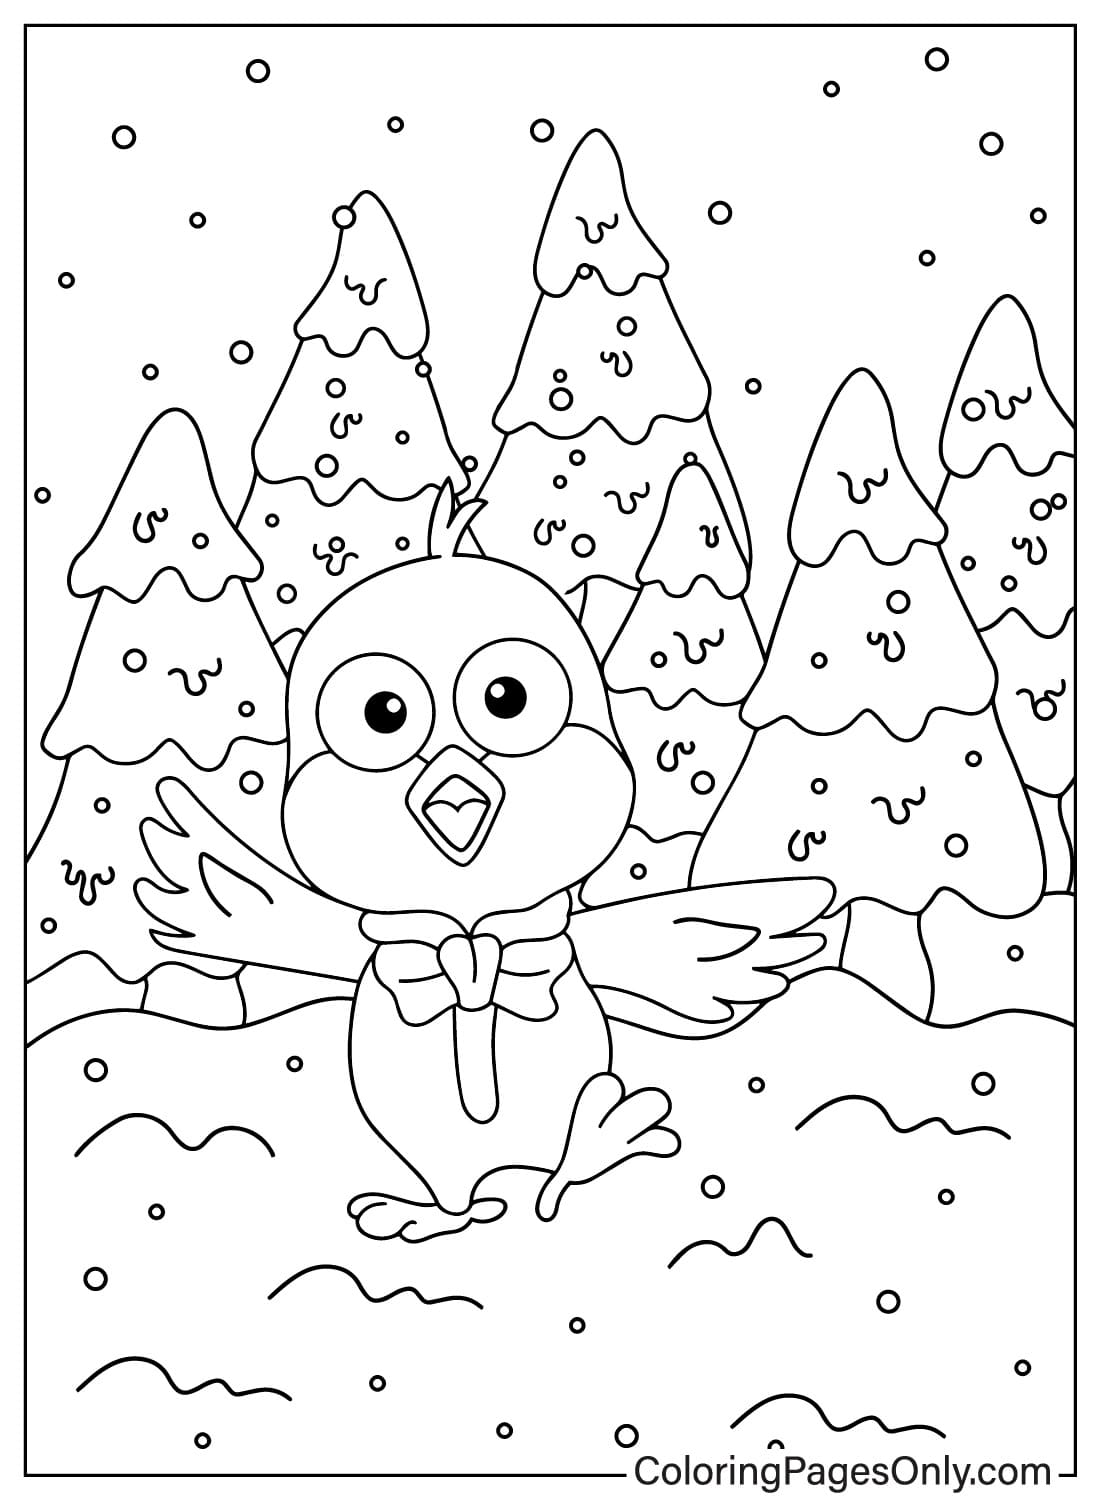 Harry Coloring Page from Pororo the Little Penguin